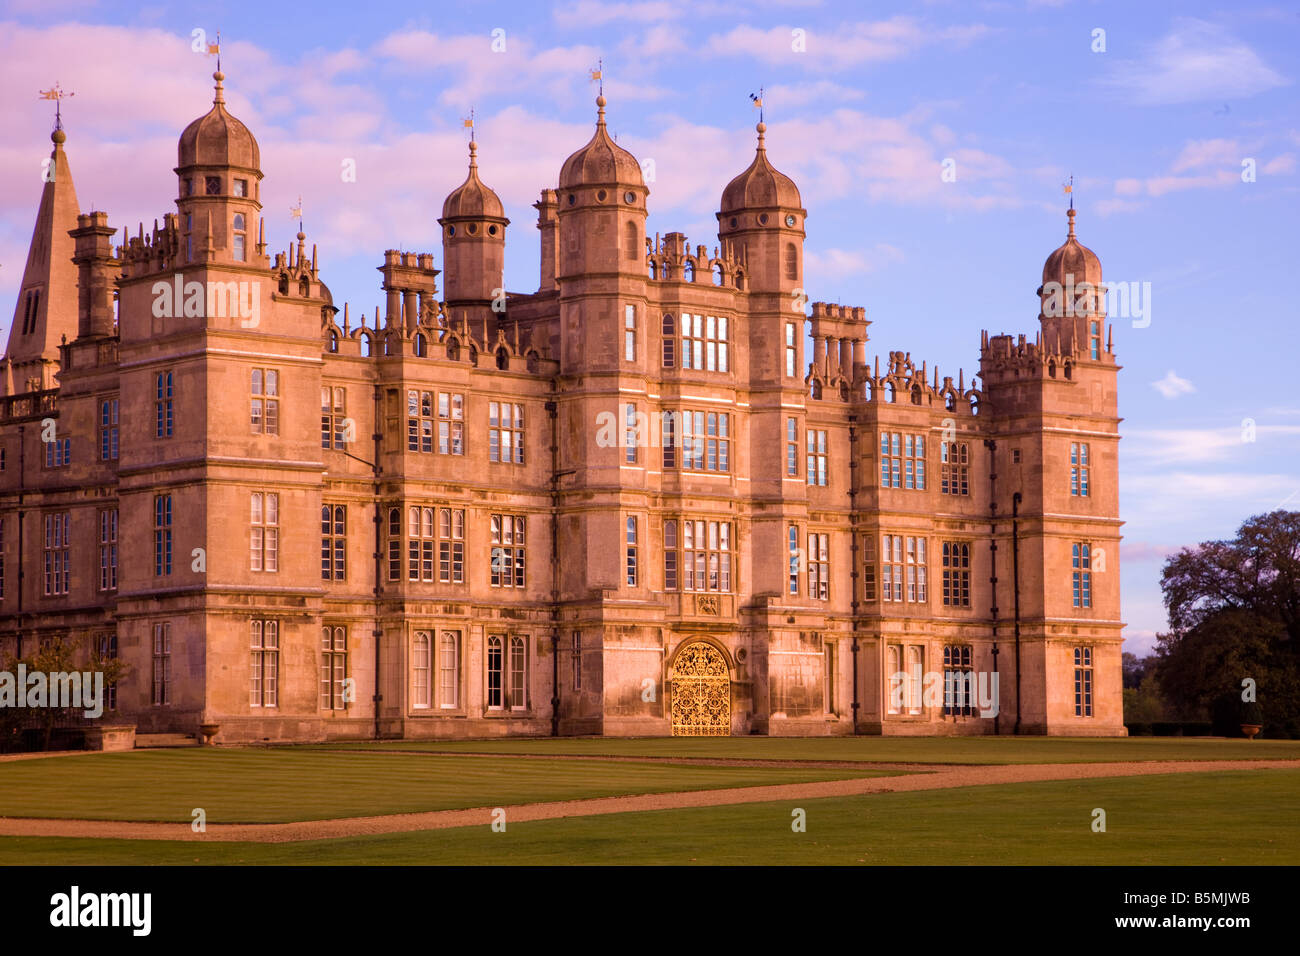 Burghley House Stamford Lincolnshire England UK Banque D'Images